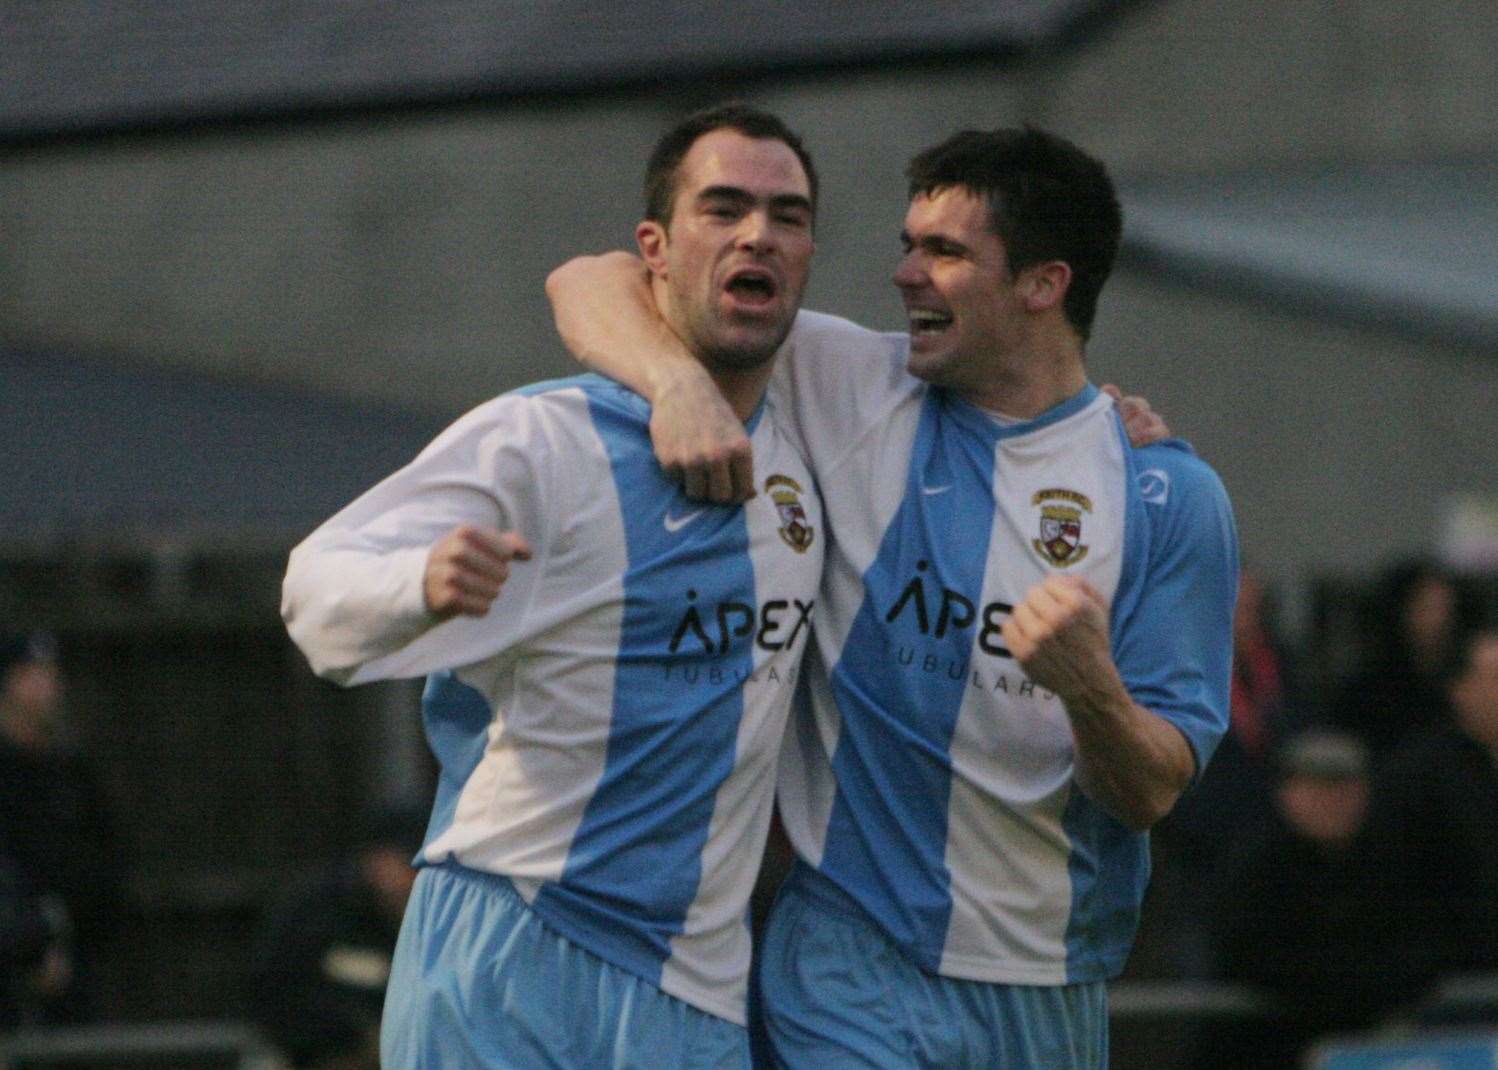 Dean Donaldson (right) celebrates a goal with Stuart Walker in 2008 during his successful playing career with Keith. Photo: Eric Cormack.